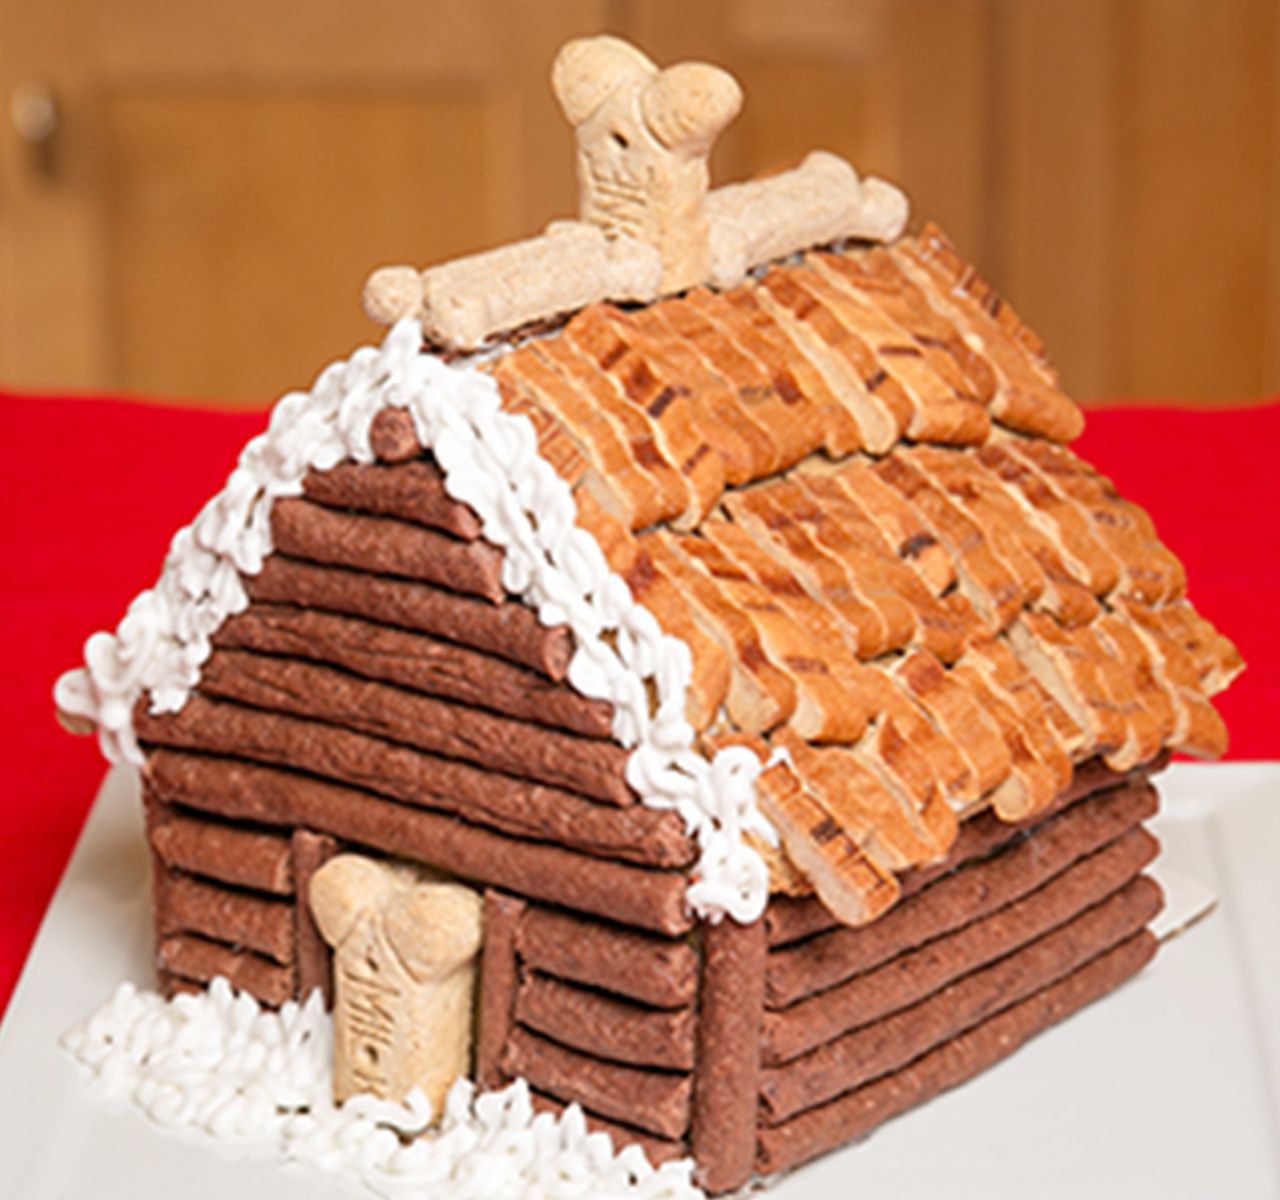 Gingerbread Dog House